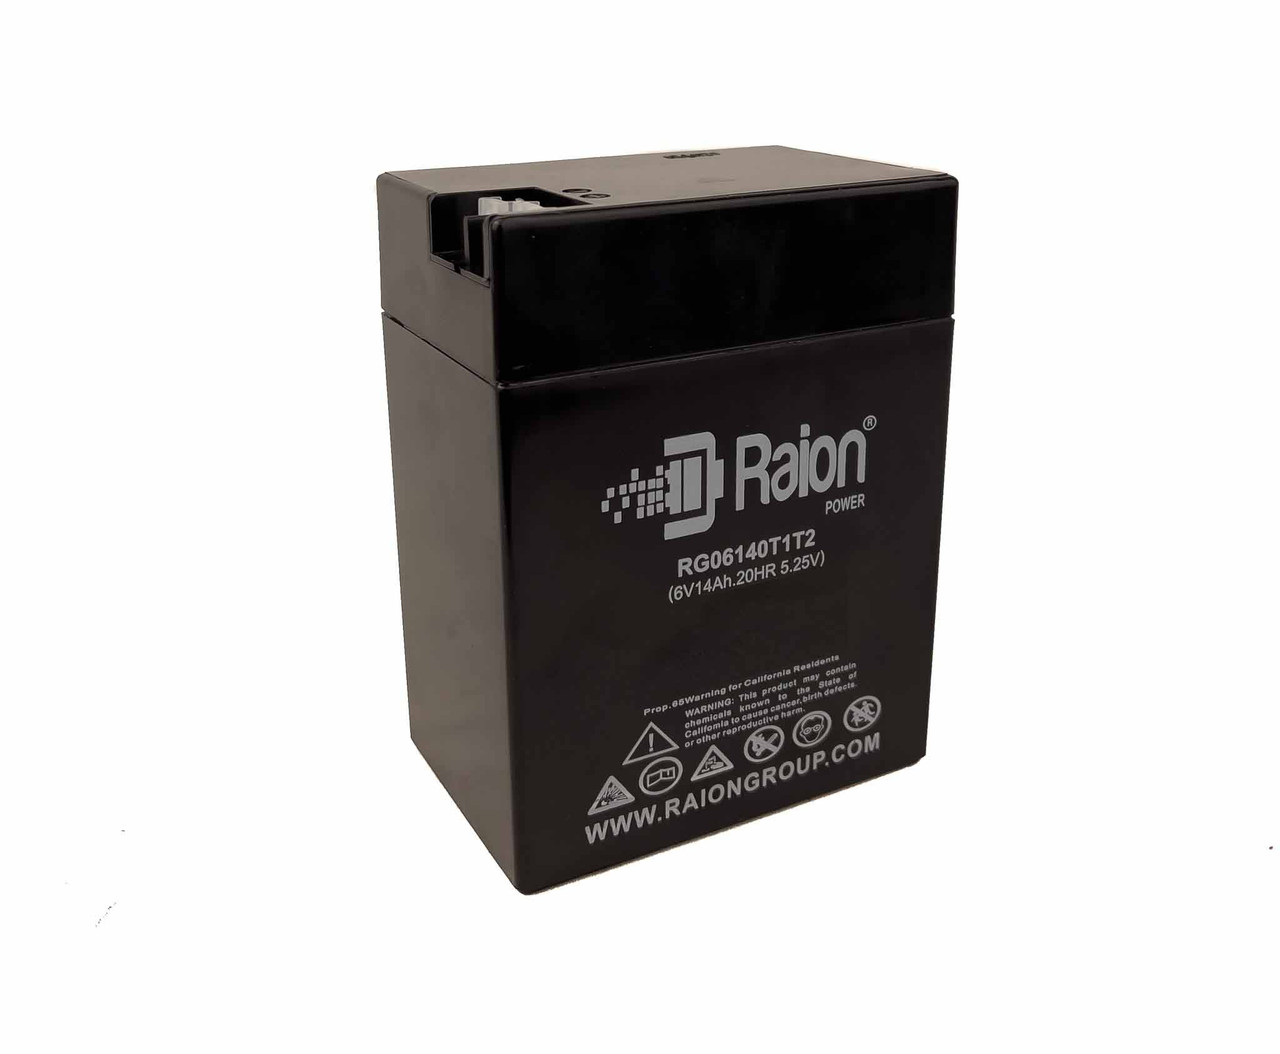 Raion Power RG06140T1T2 Non-Spillable Replacement Battery for Cycle Sound Raider 550 (Hong Kong) 74535-9563